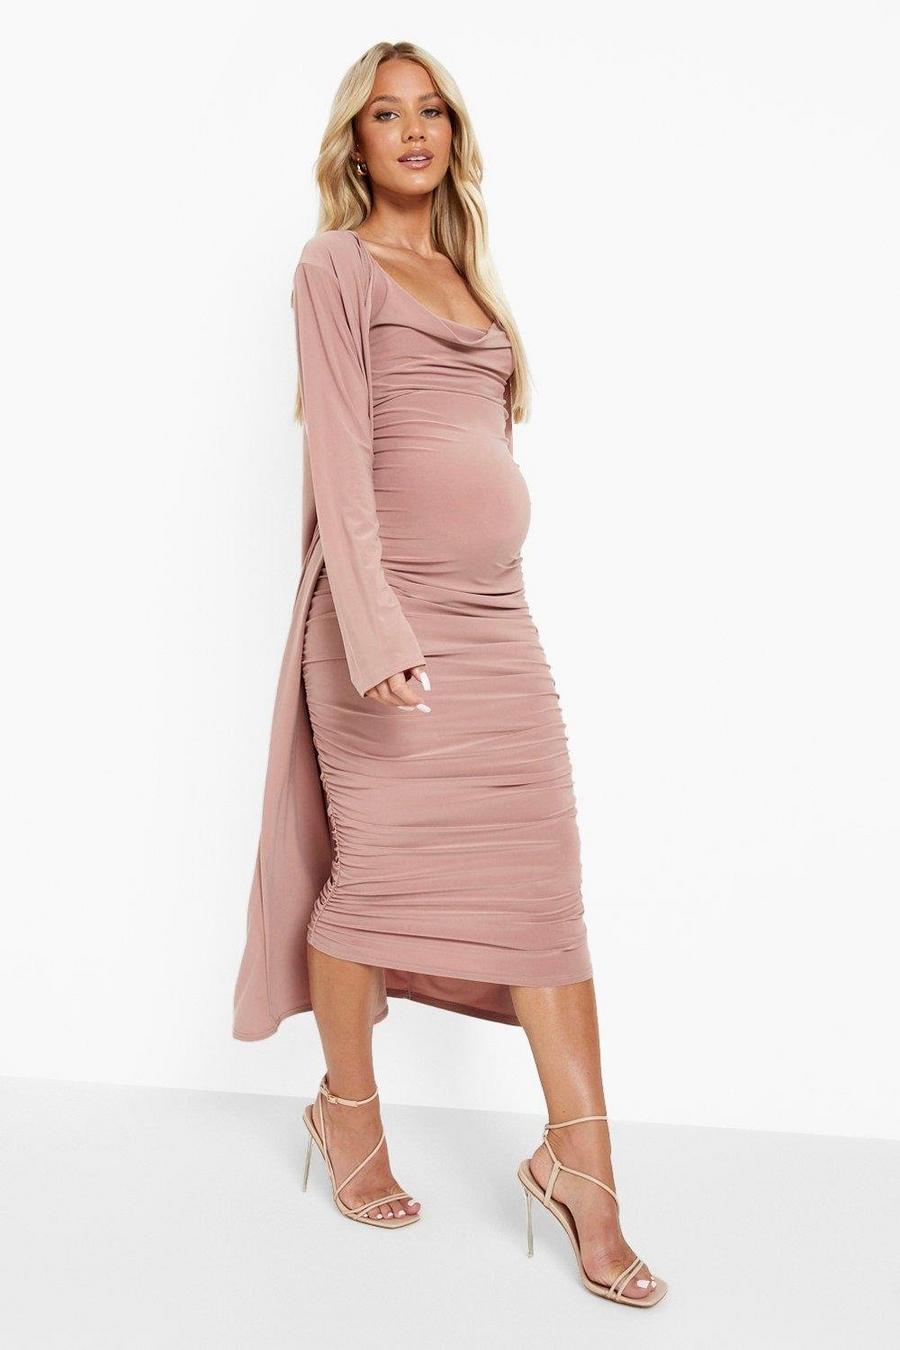 Women's Maternity Strappy Cowl Neck Dress And Duster Coat